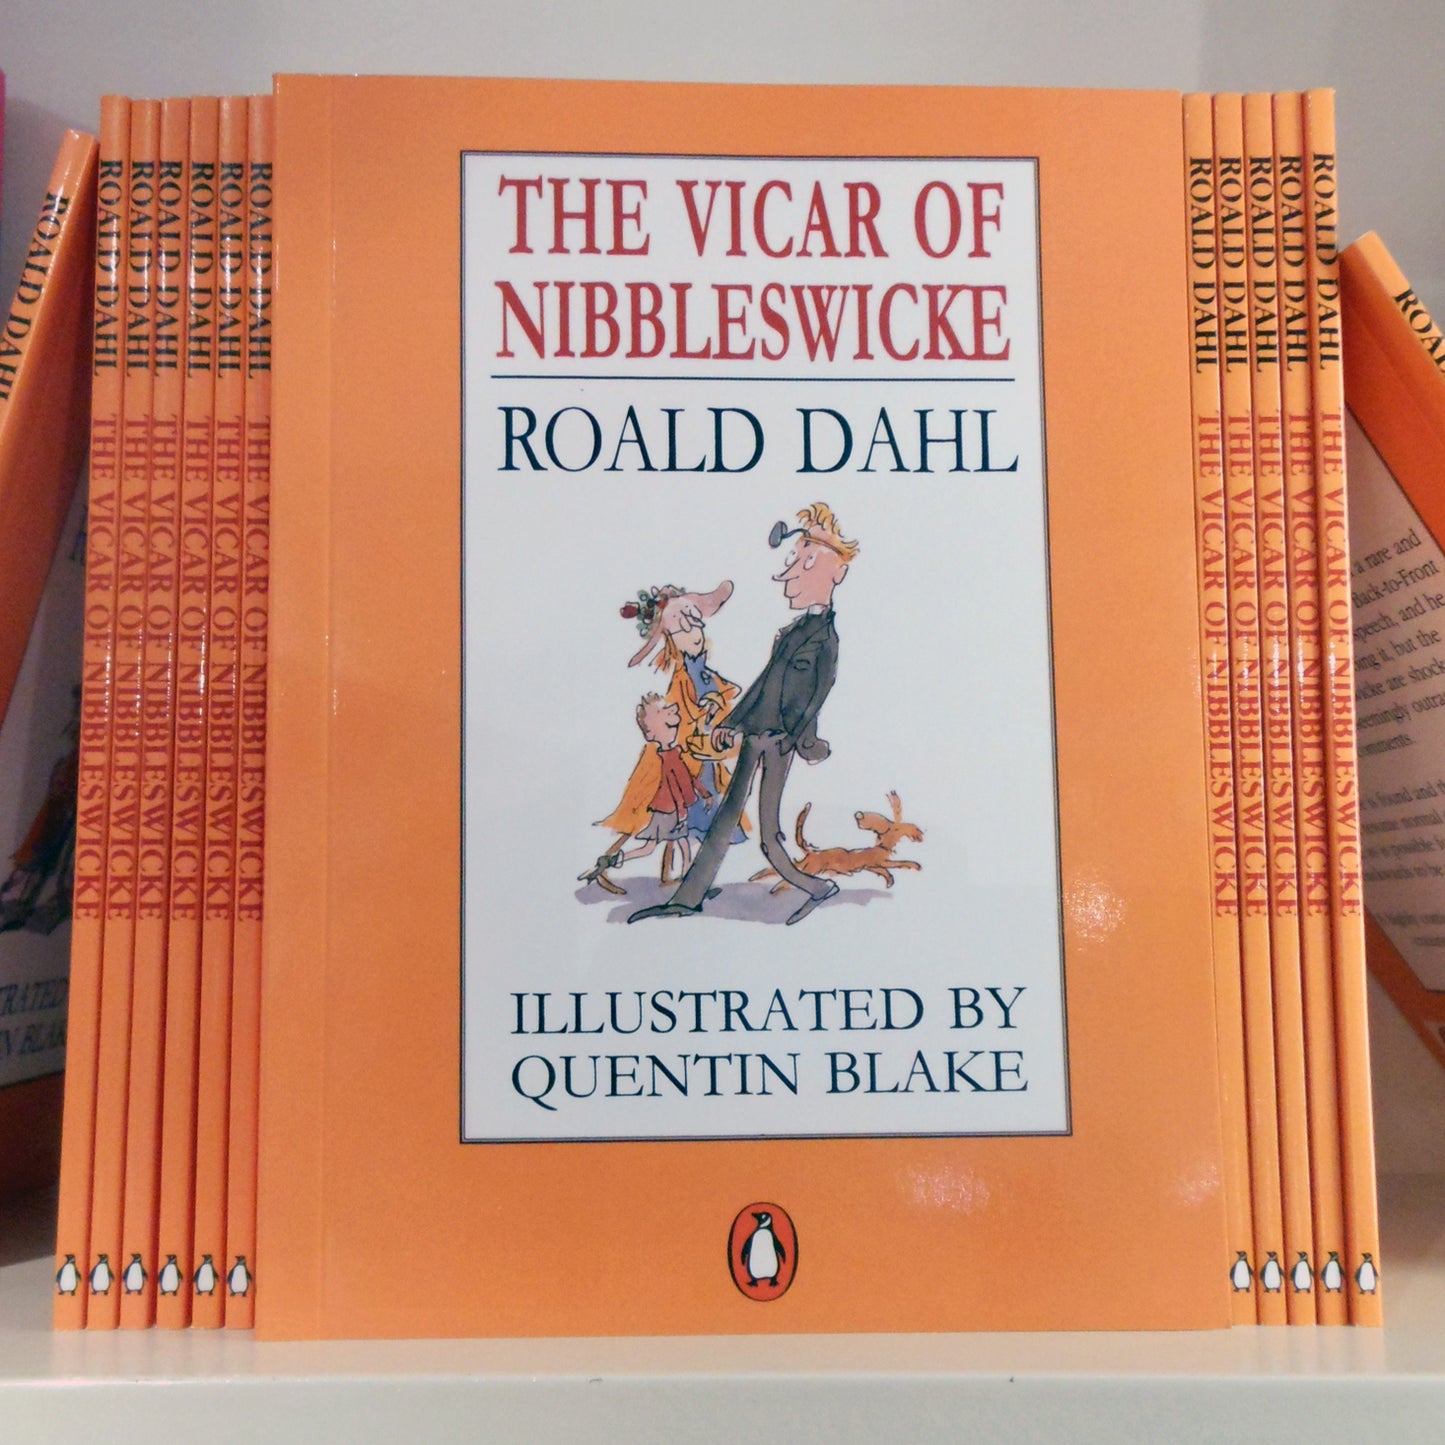 The Vicar of Nibbleswick by Roald Dahl illustrated by Quentin Blake